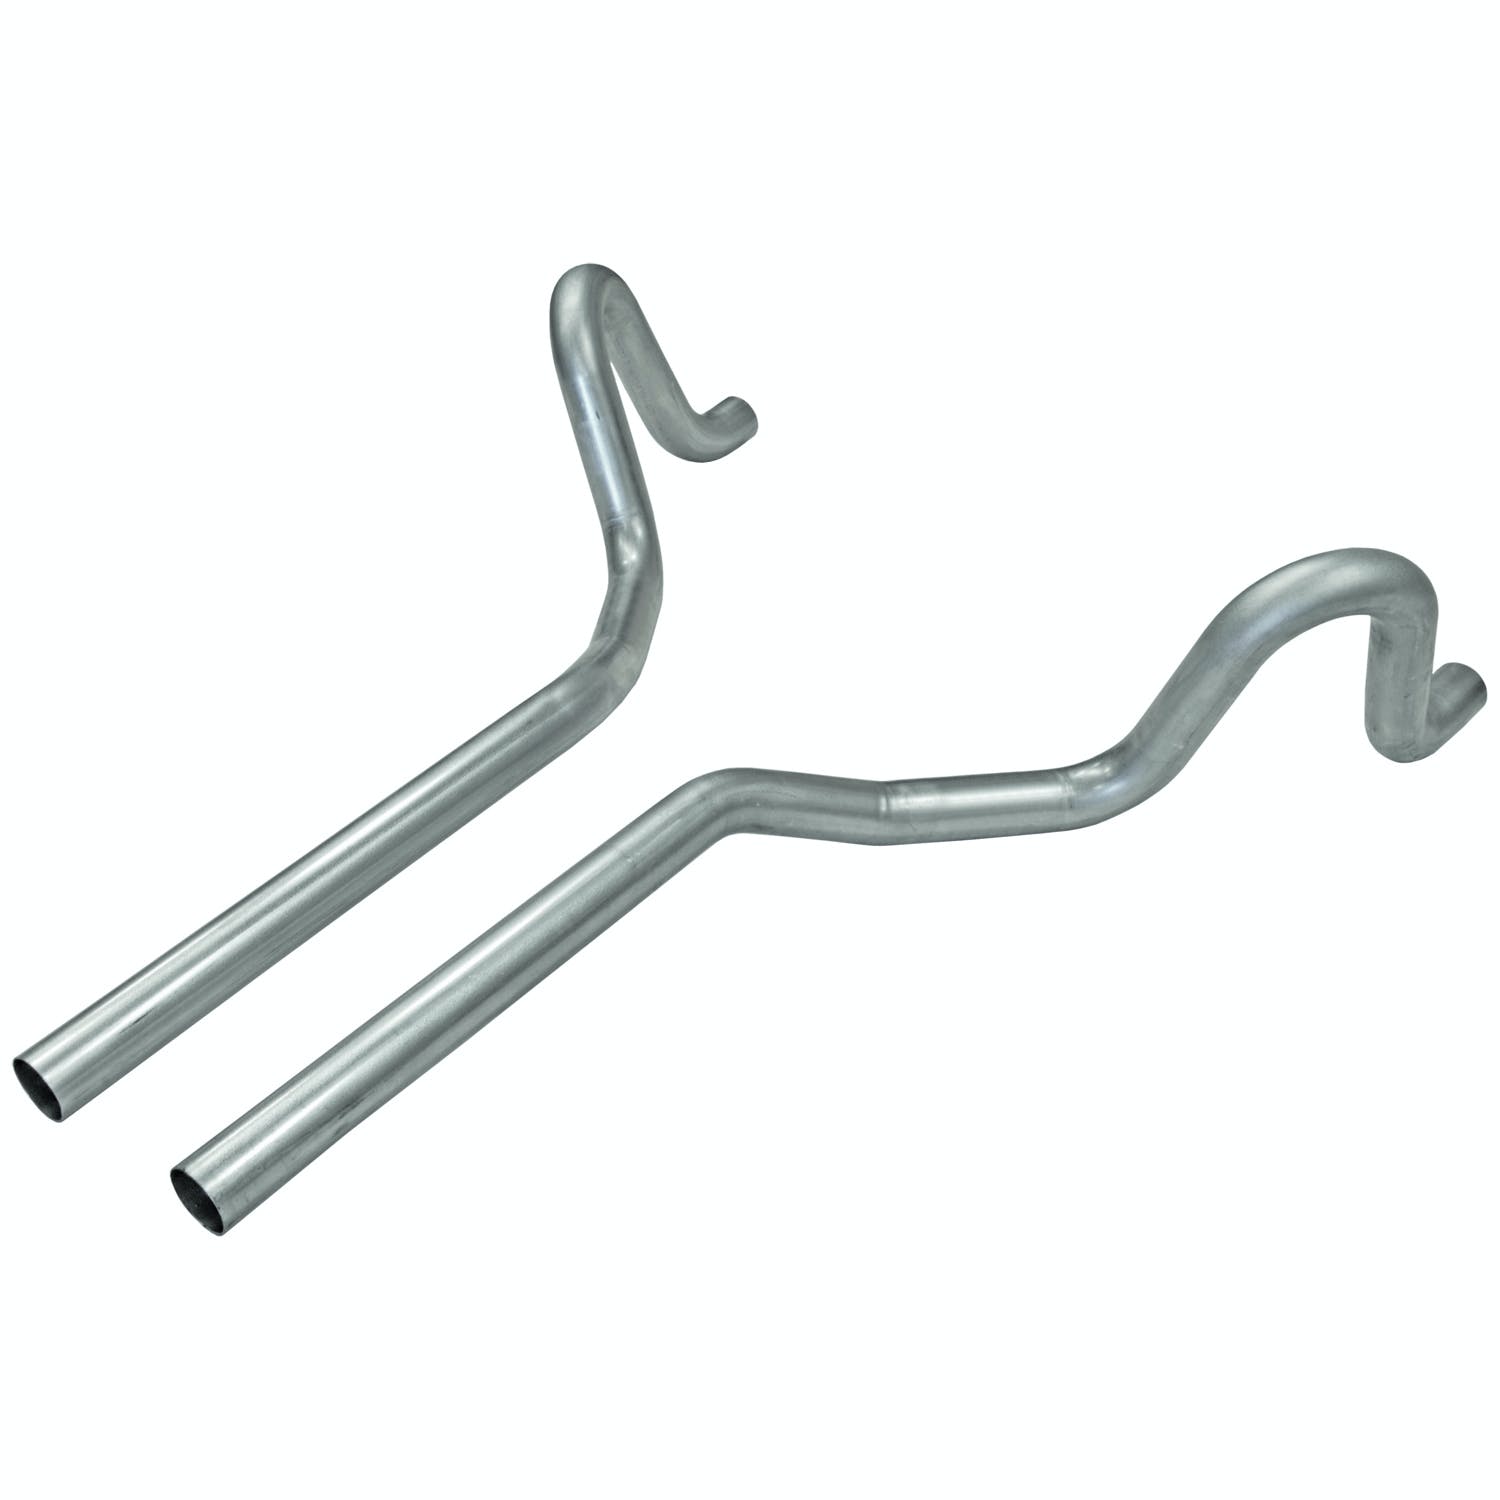 Flowmaster 15802 GM A-BODY T-PIPES 1PR.